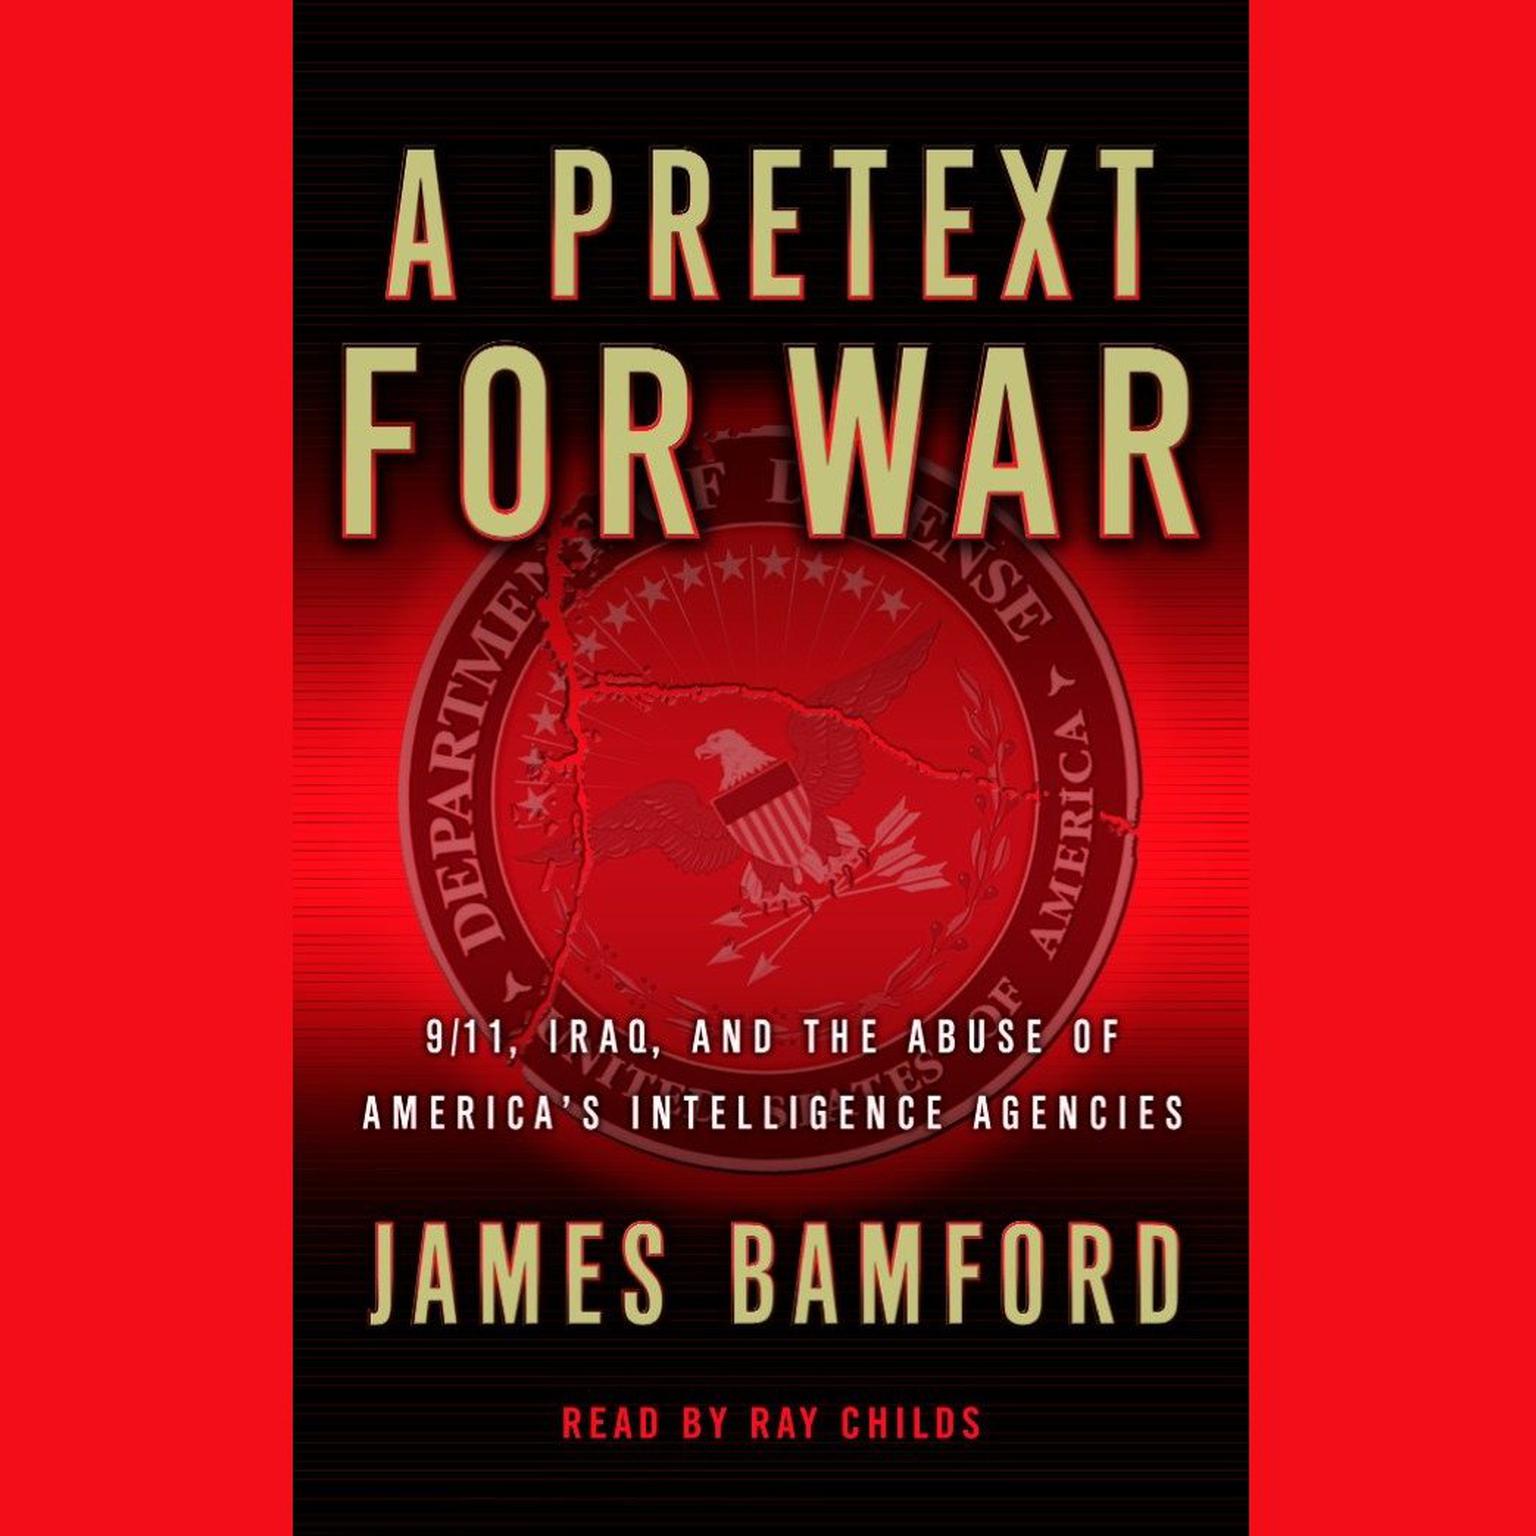 A Pretext For War: 9/11, Iraq, and the Abuse of Americas Intelligence Agencies Audiobook, by James Bamford